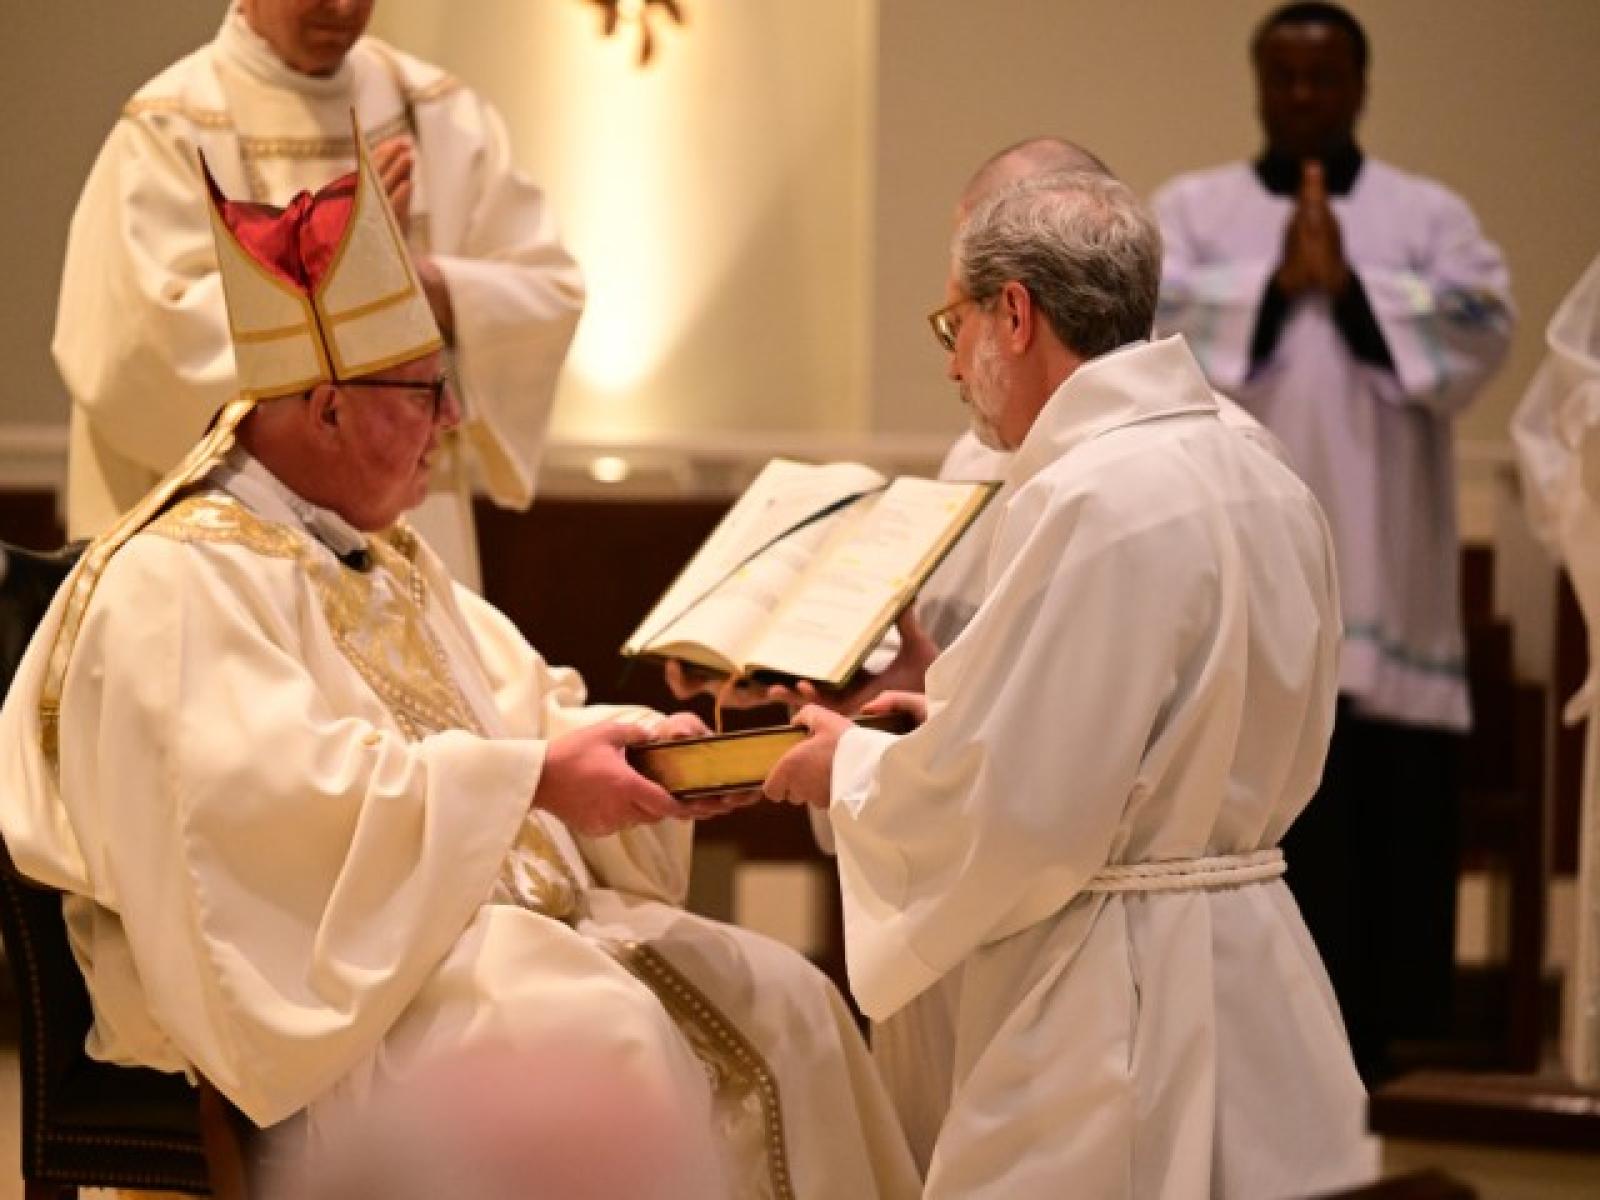 Bishop William D. Byrne with Brother Charles Tupta _25, C.O., Rock Hill Oratory